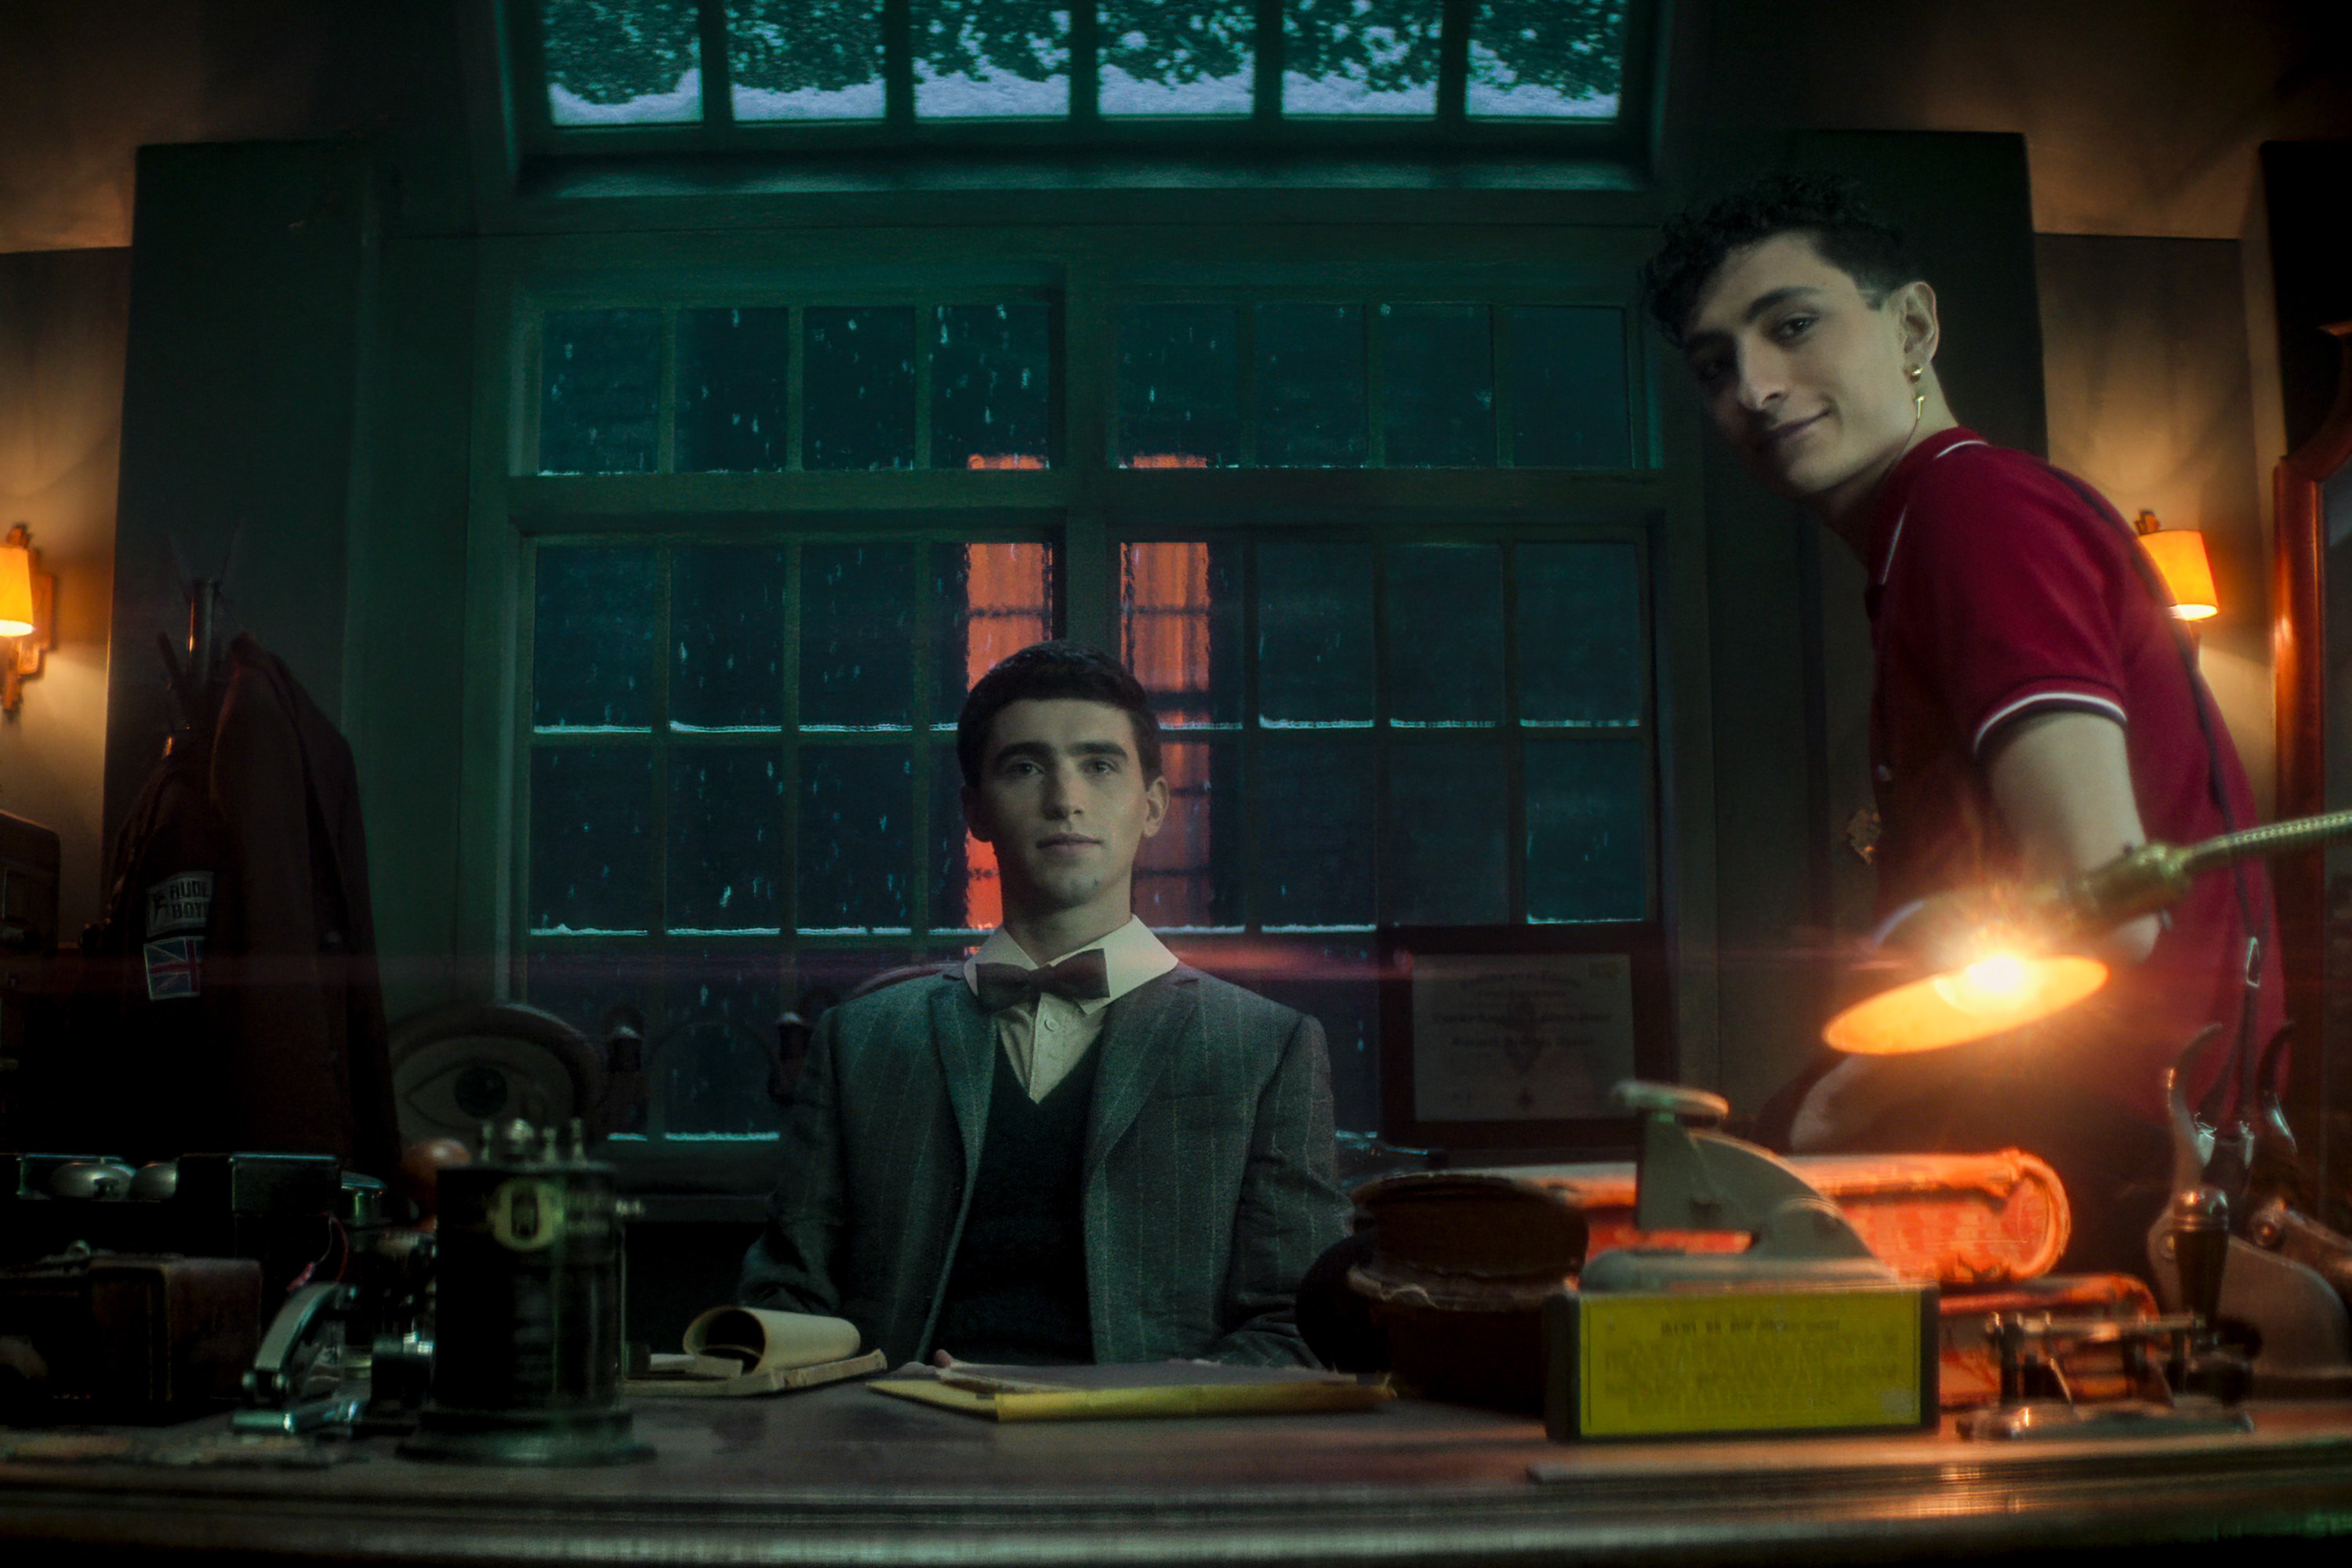 DEAD BOY DETECTIVES. (L to R) George Rexstrew as Edwin Payne and Jayden Revri as Charles Rowland in episode 101 in DEAD BOY DETECTIVES. Cr. Courtesy of Netflix © 2023